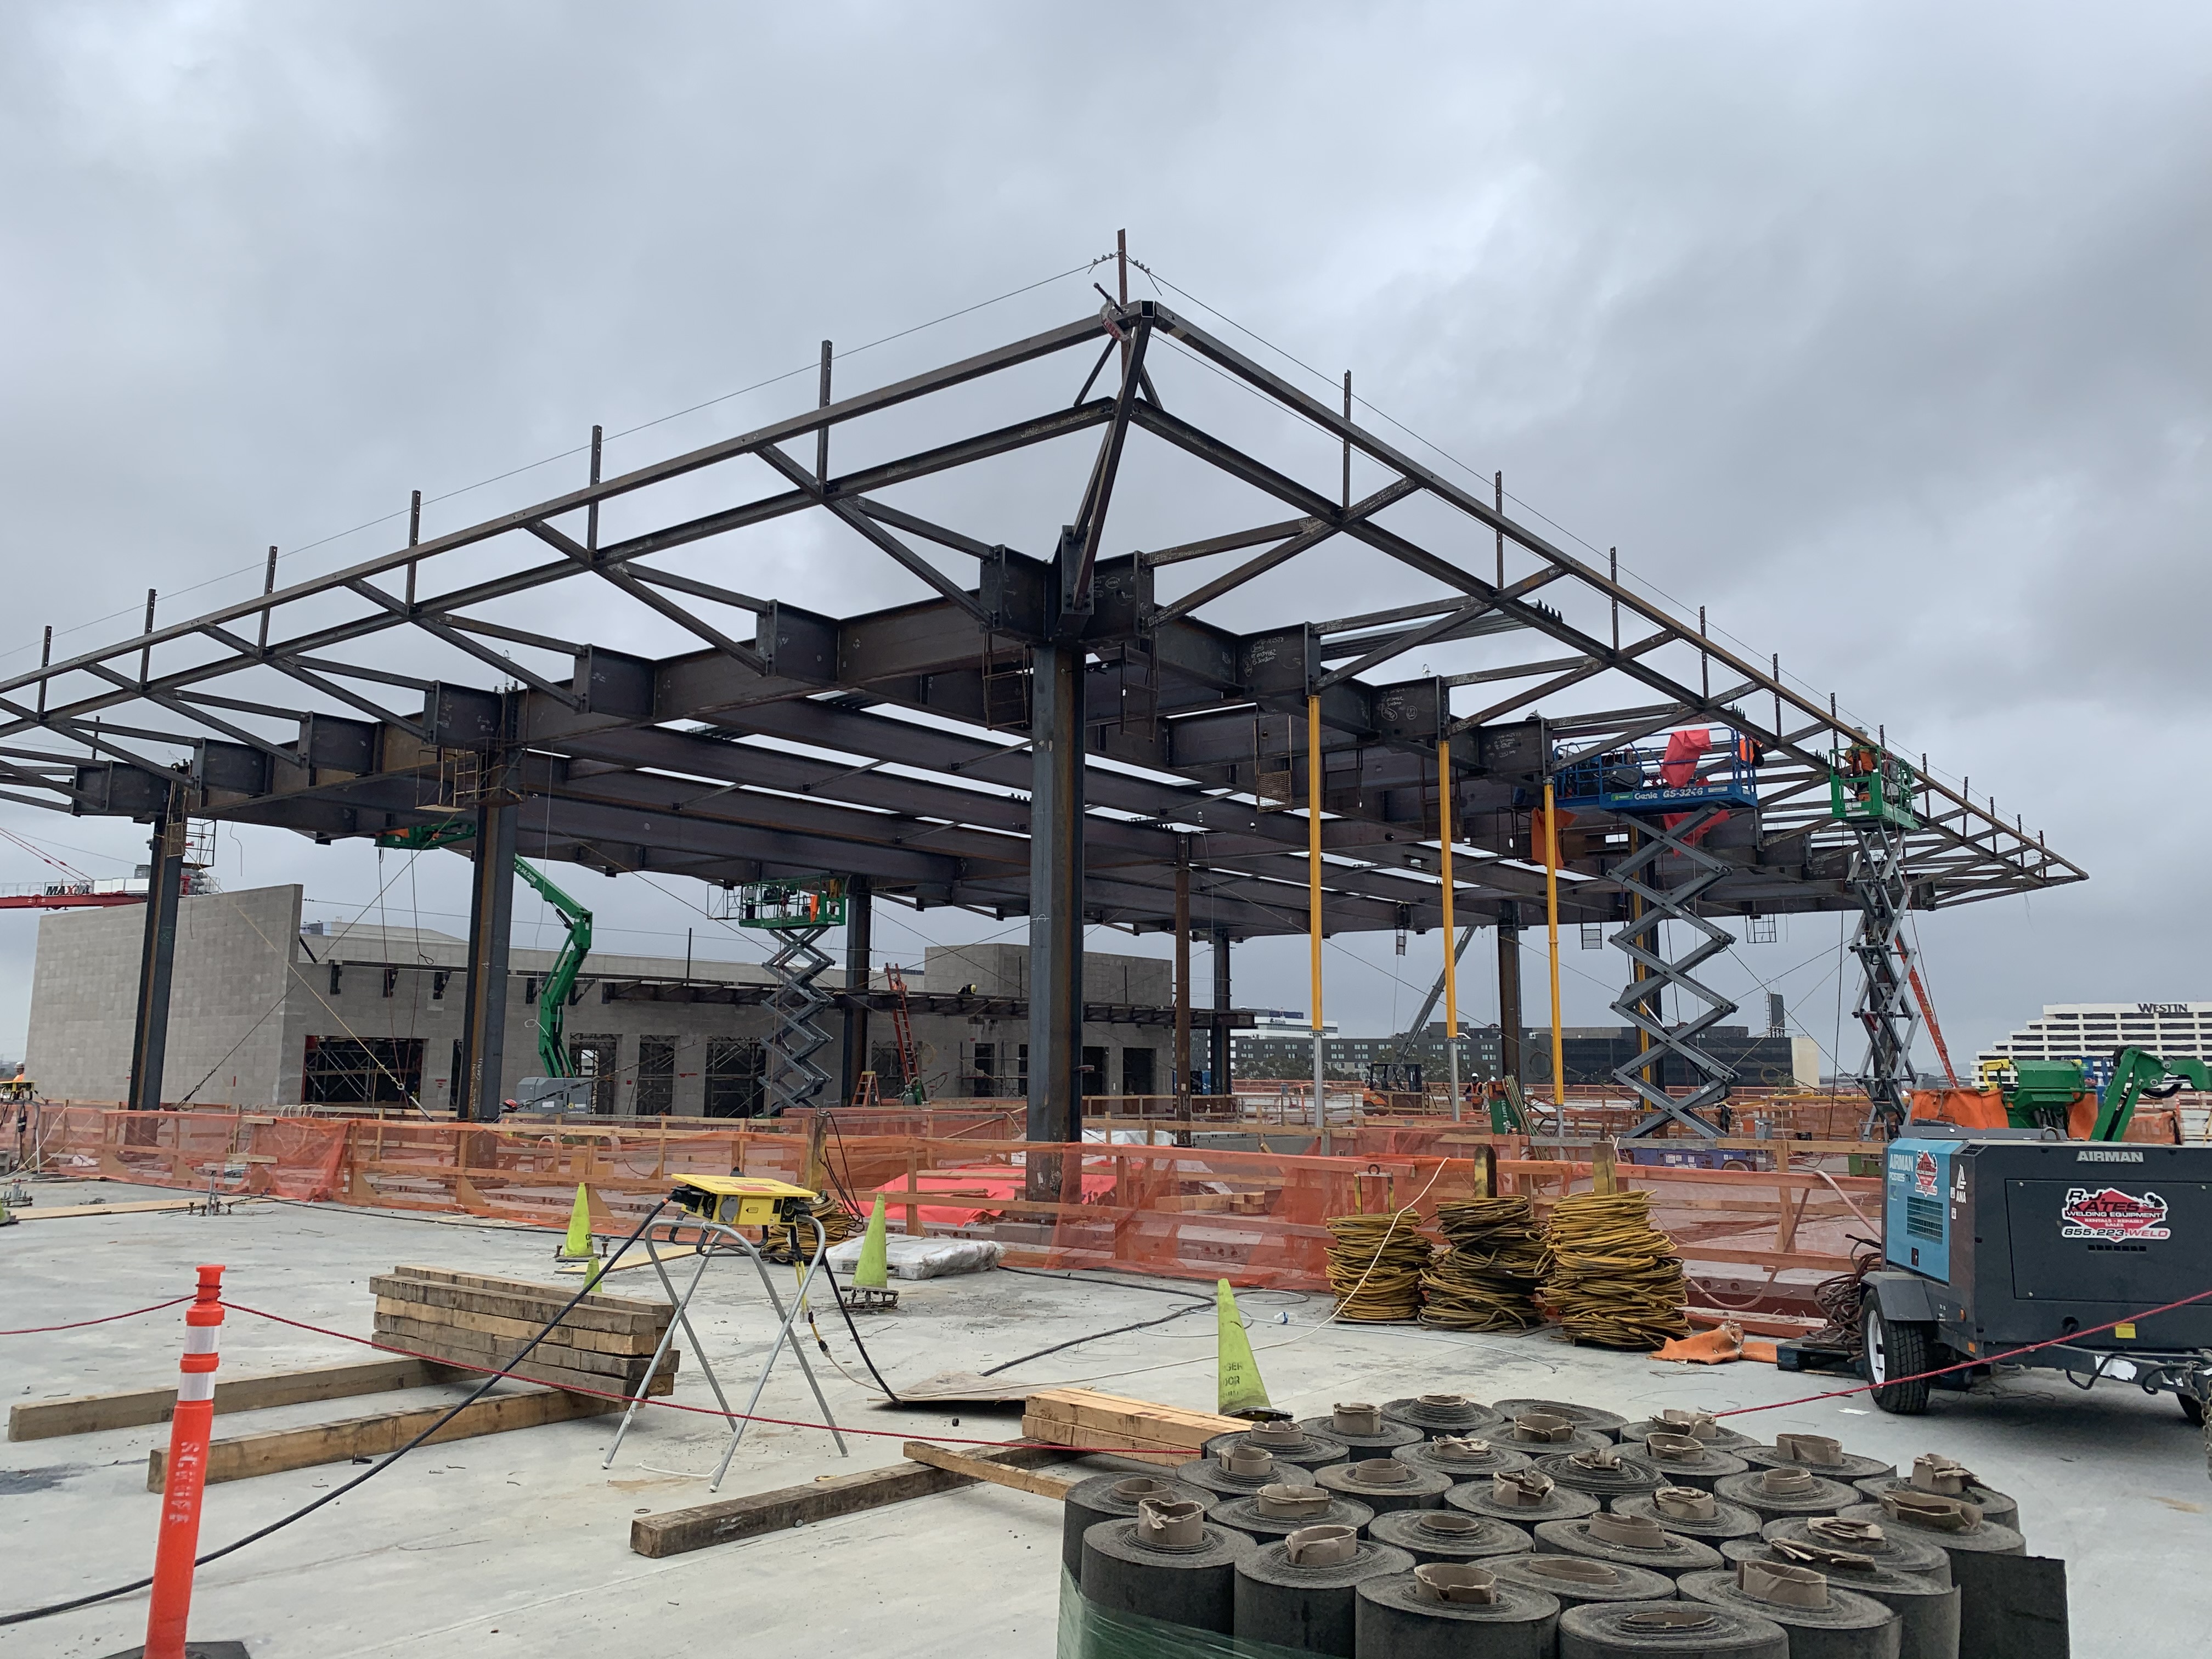 Structural steel installation for the Automated People Mover station canopy at the Consolidated Rent-A-Car facility.